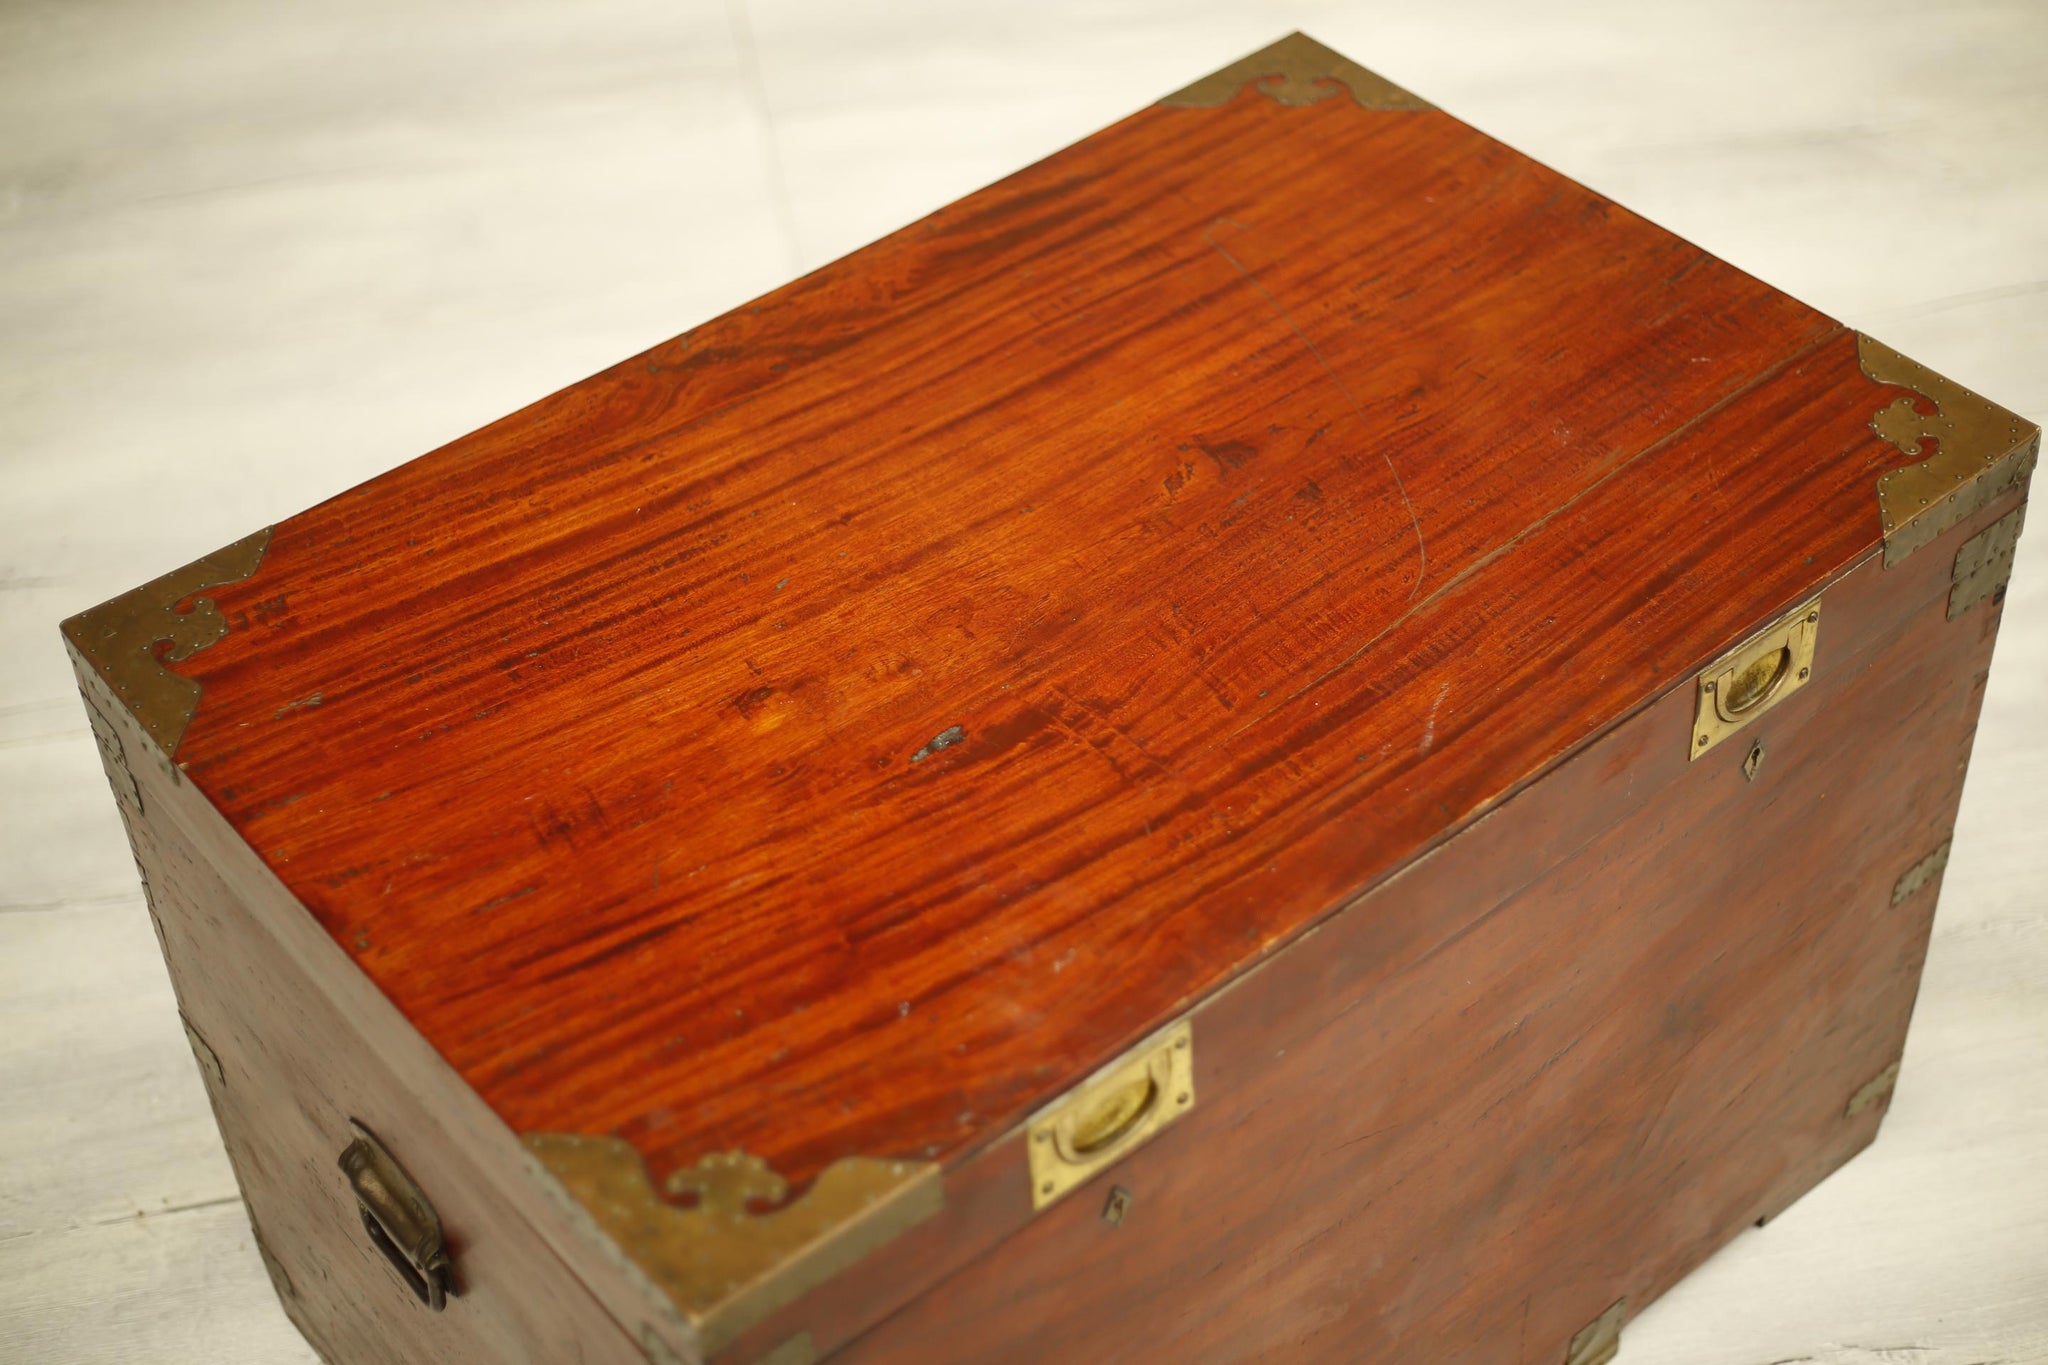 19th century Anglo-Indian Camphor wood campaign trunk - TallBoy Interiors